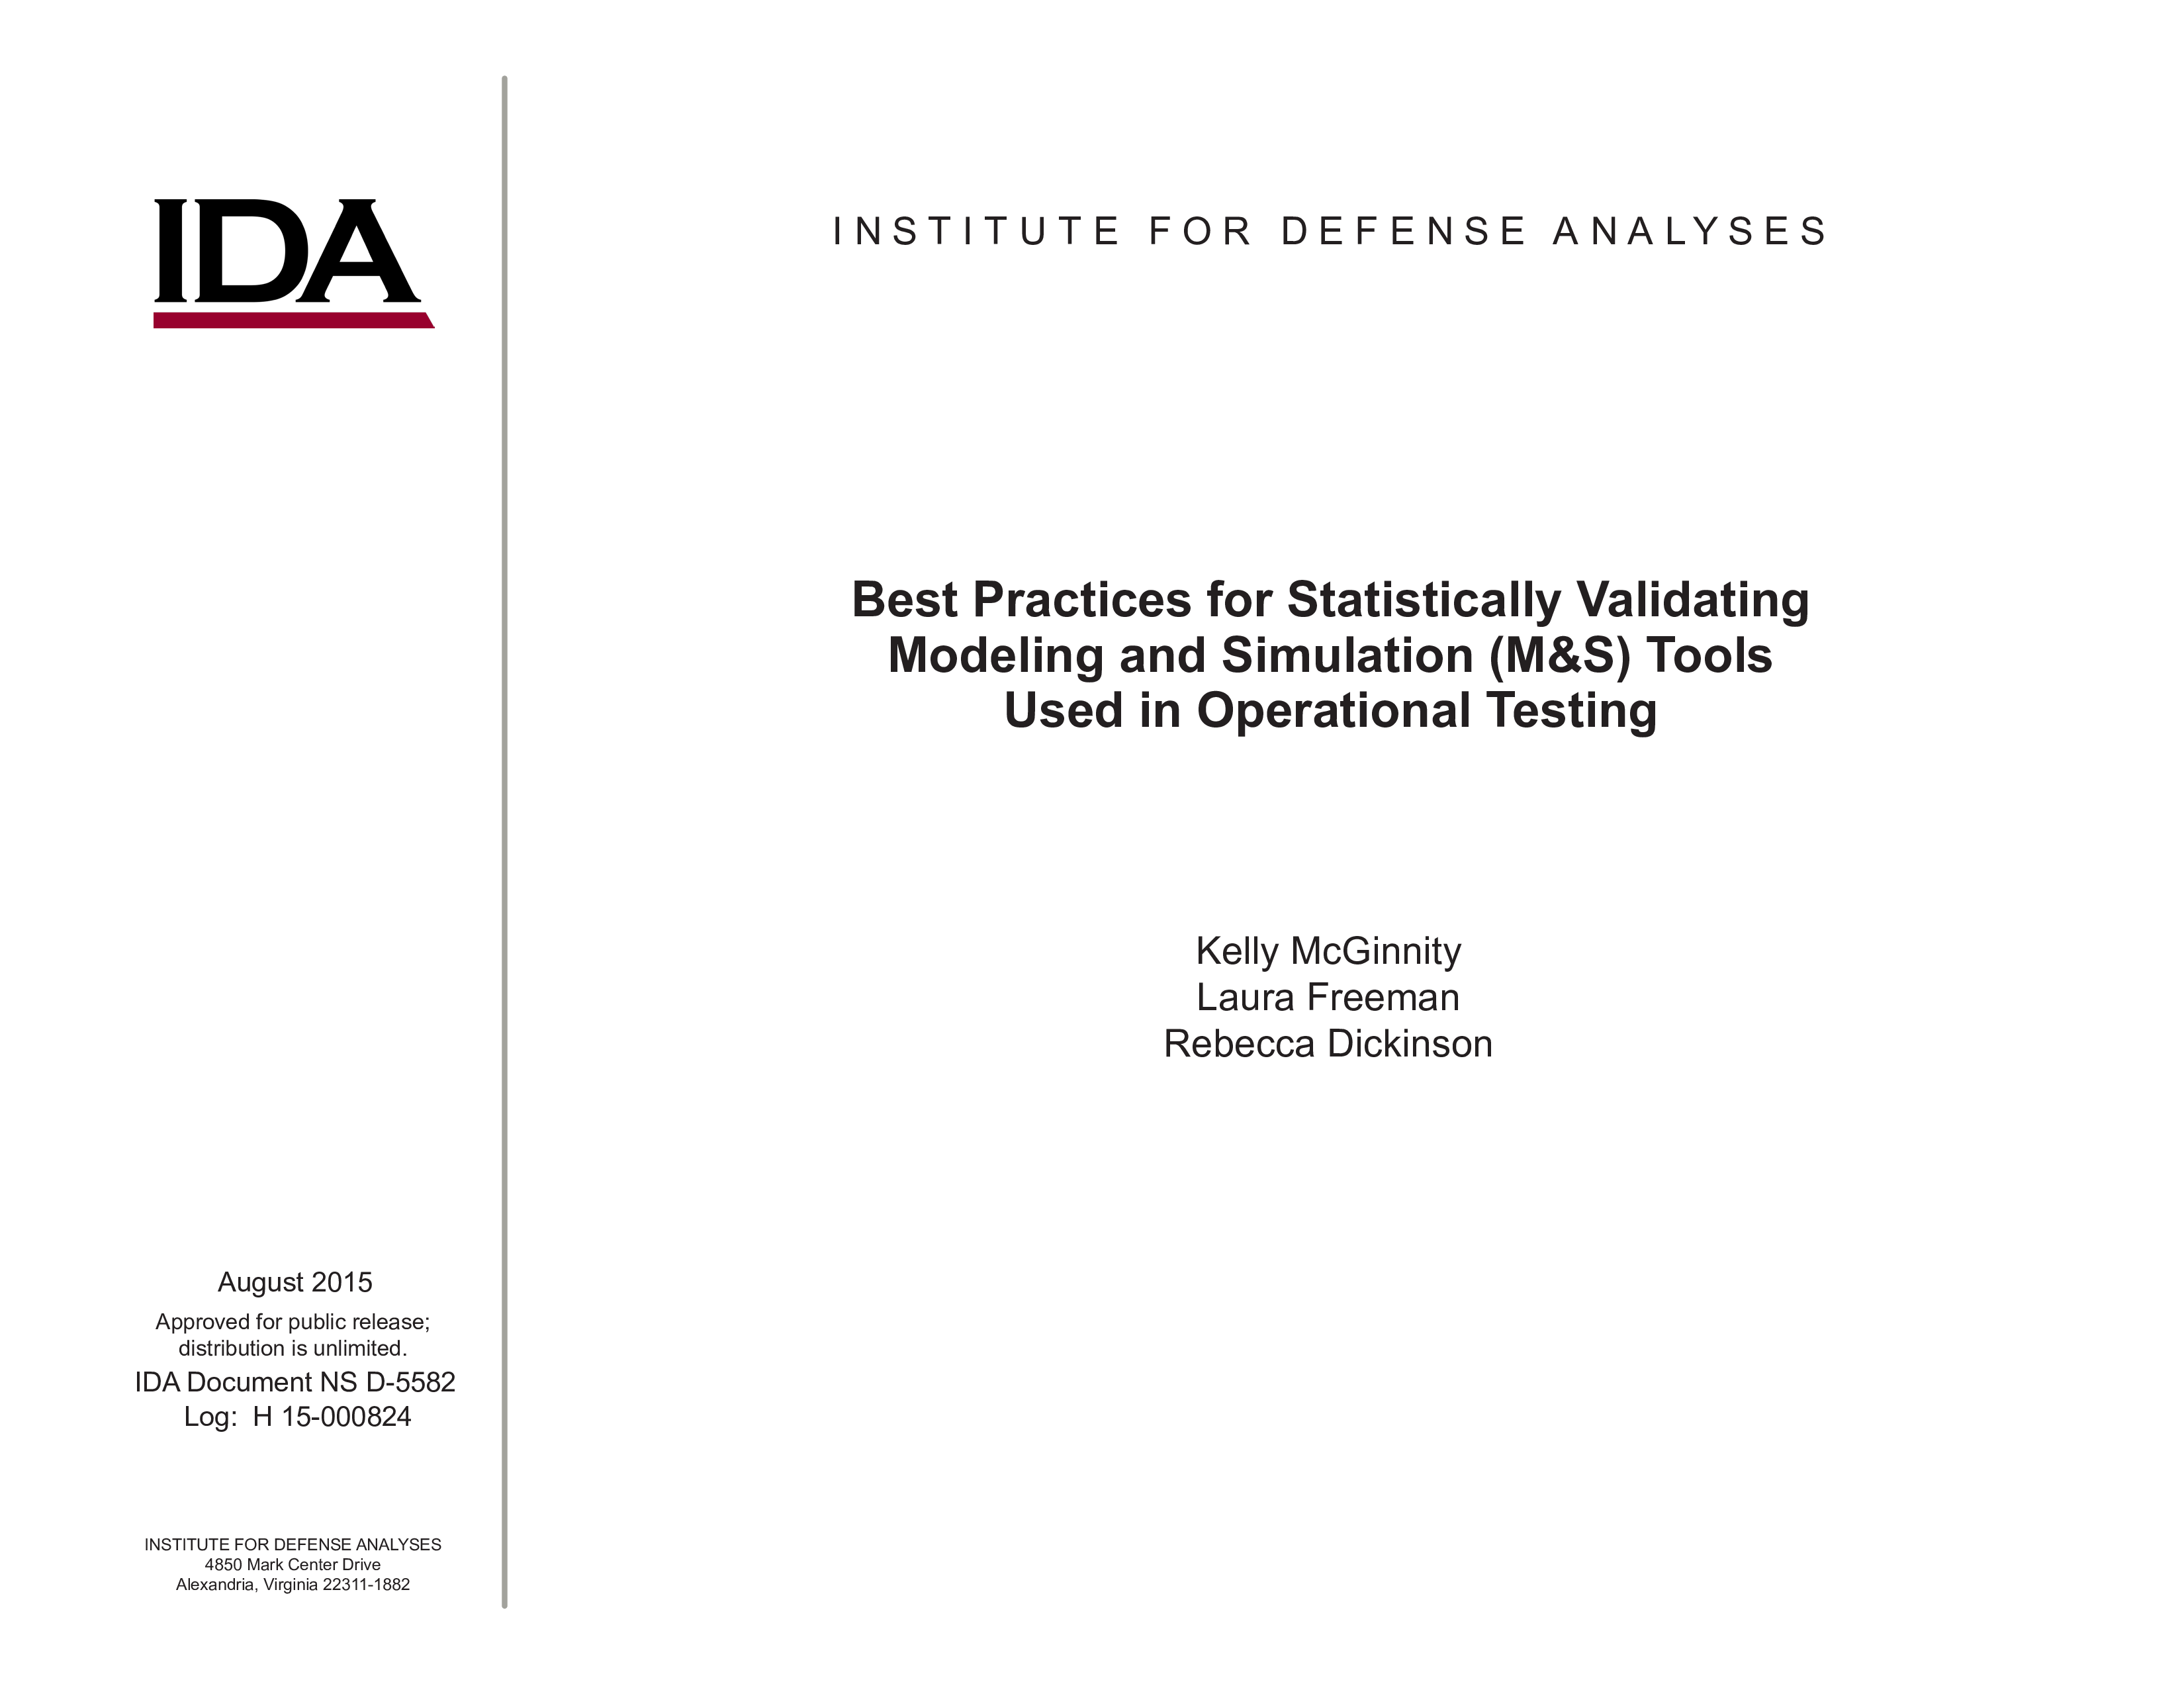 Best Practices for Statistically Validating Modeling and Simulation (M&S) Tools Used in Operational Testing